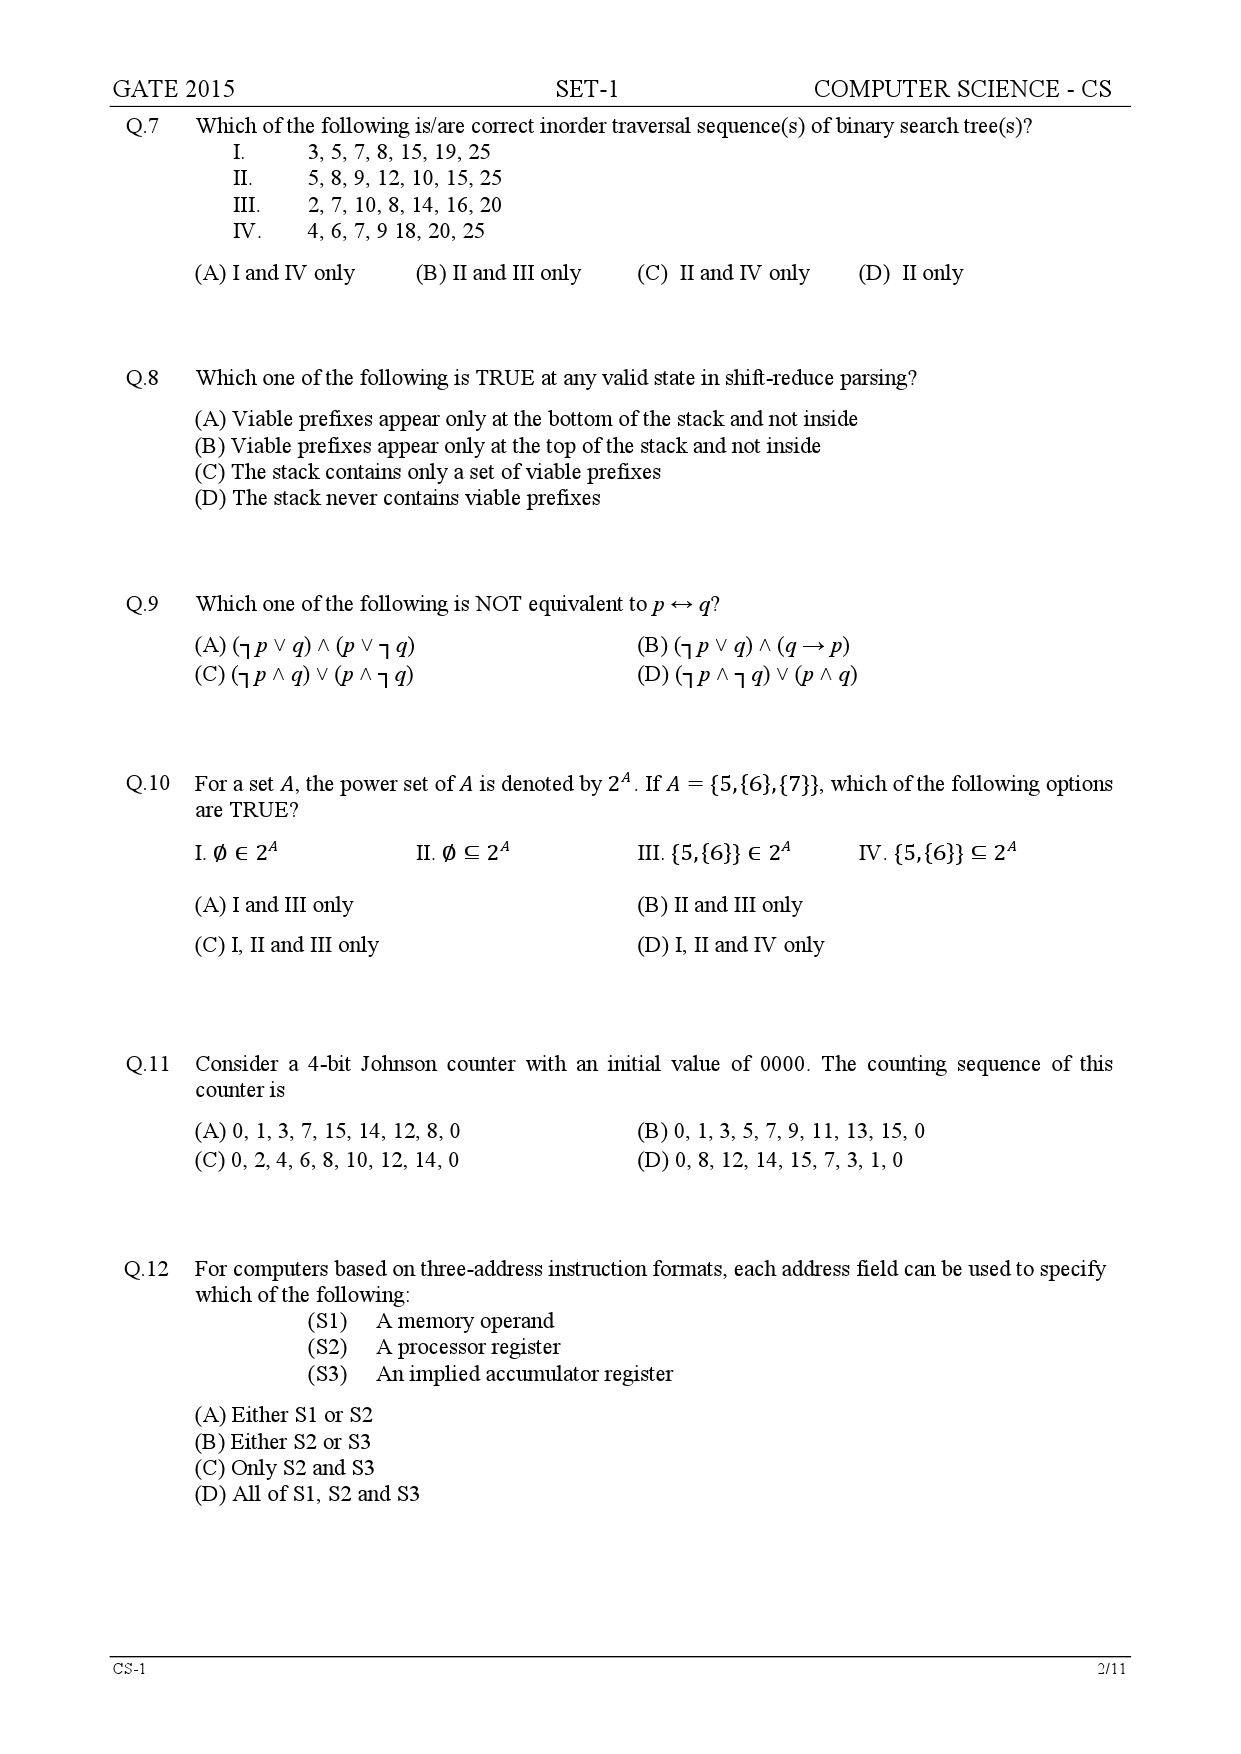 GATE Exam Question Paper 2015 Computer Science and Information Technology Set 1 2